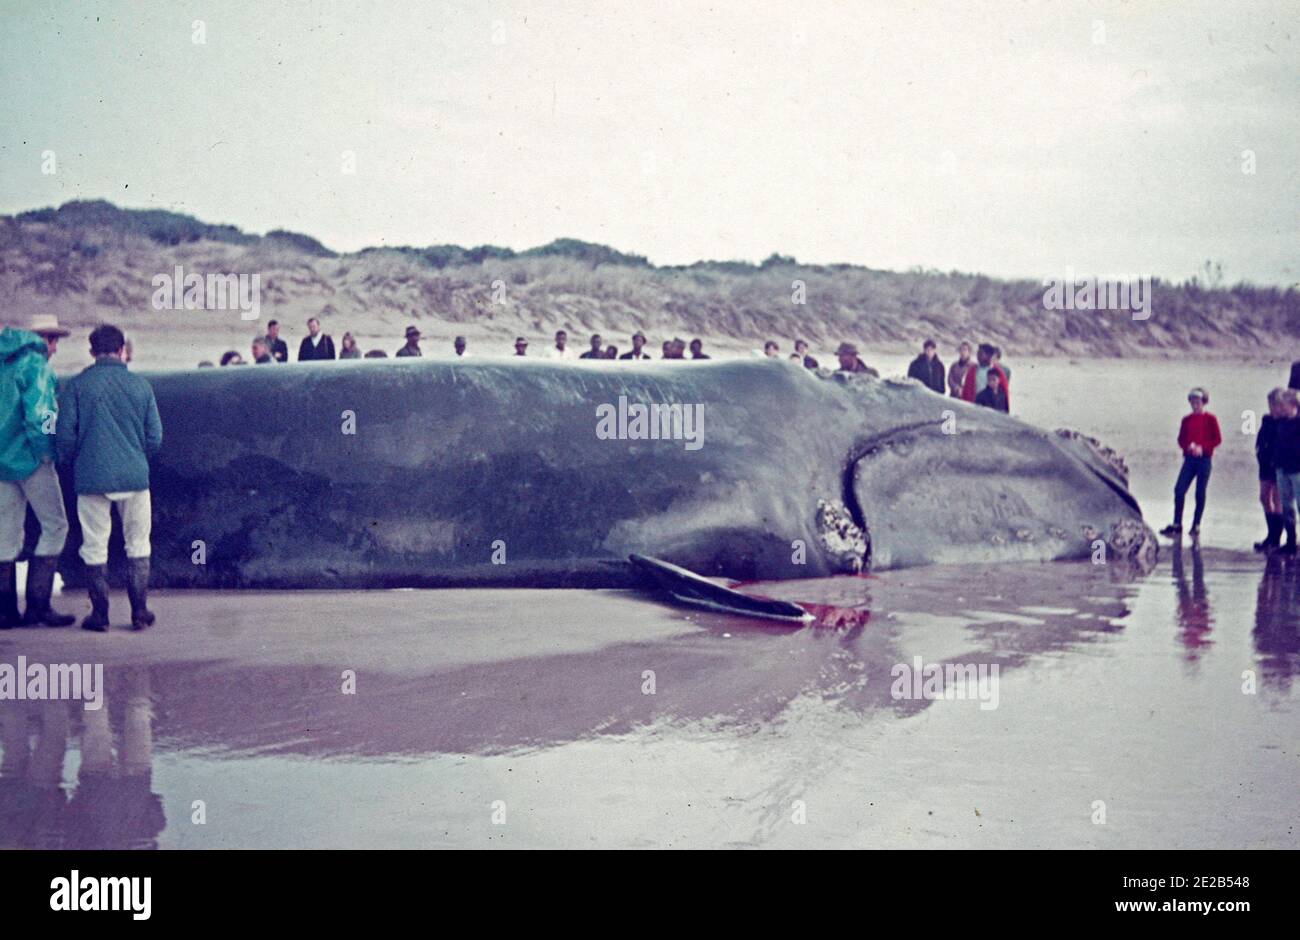 A Whale washed up on the beach in South Africa, circa 1960 Stock Photo